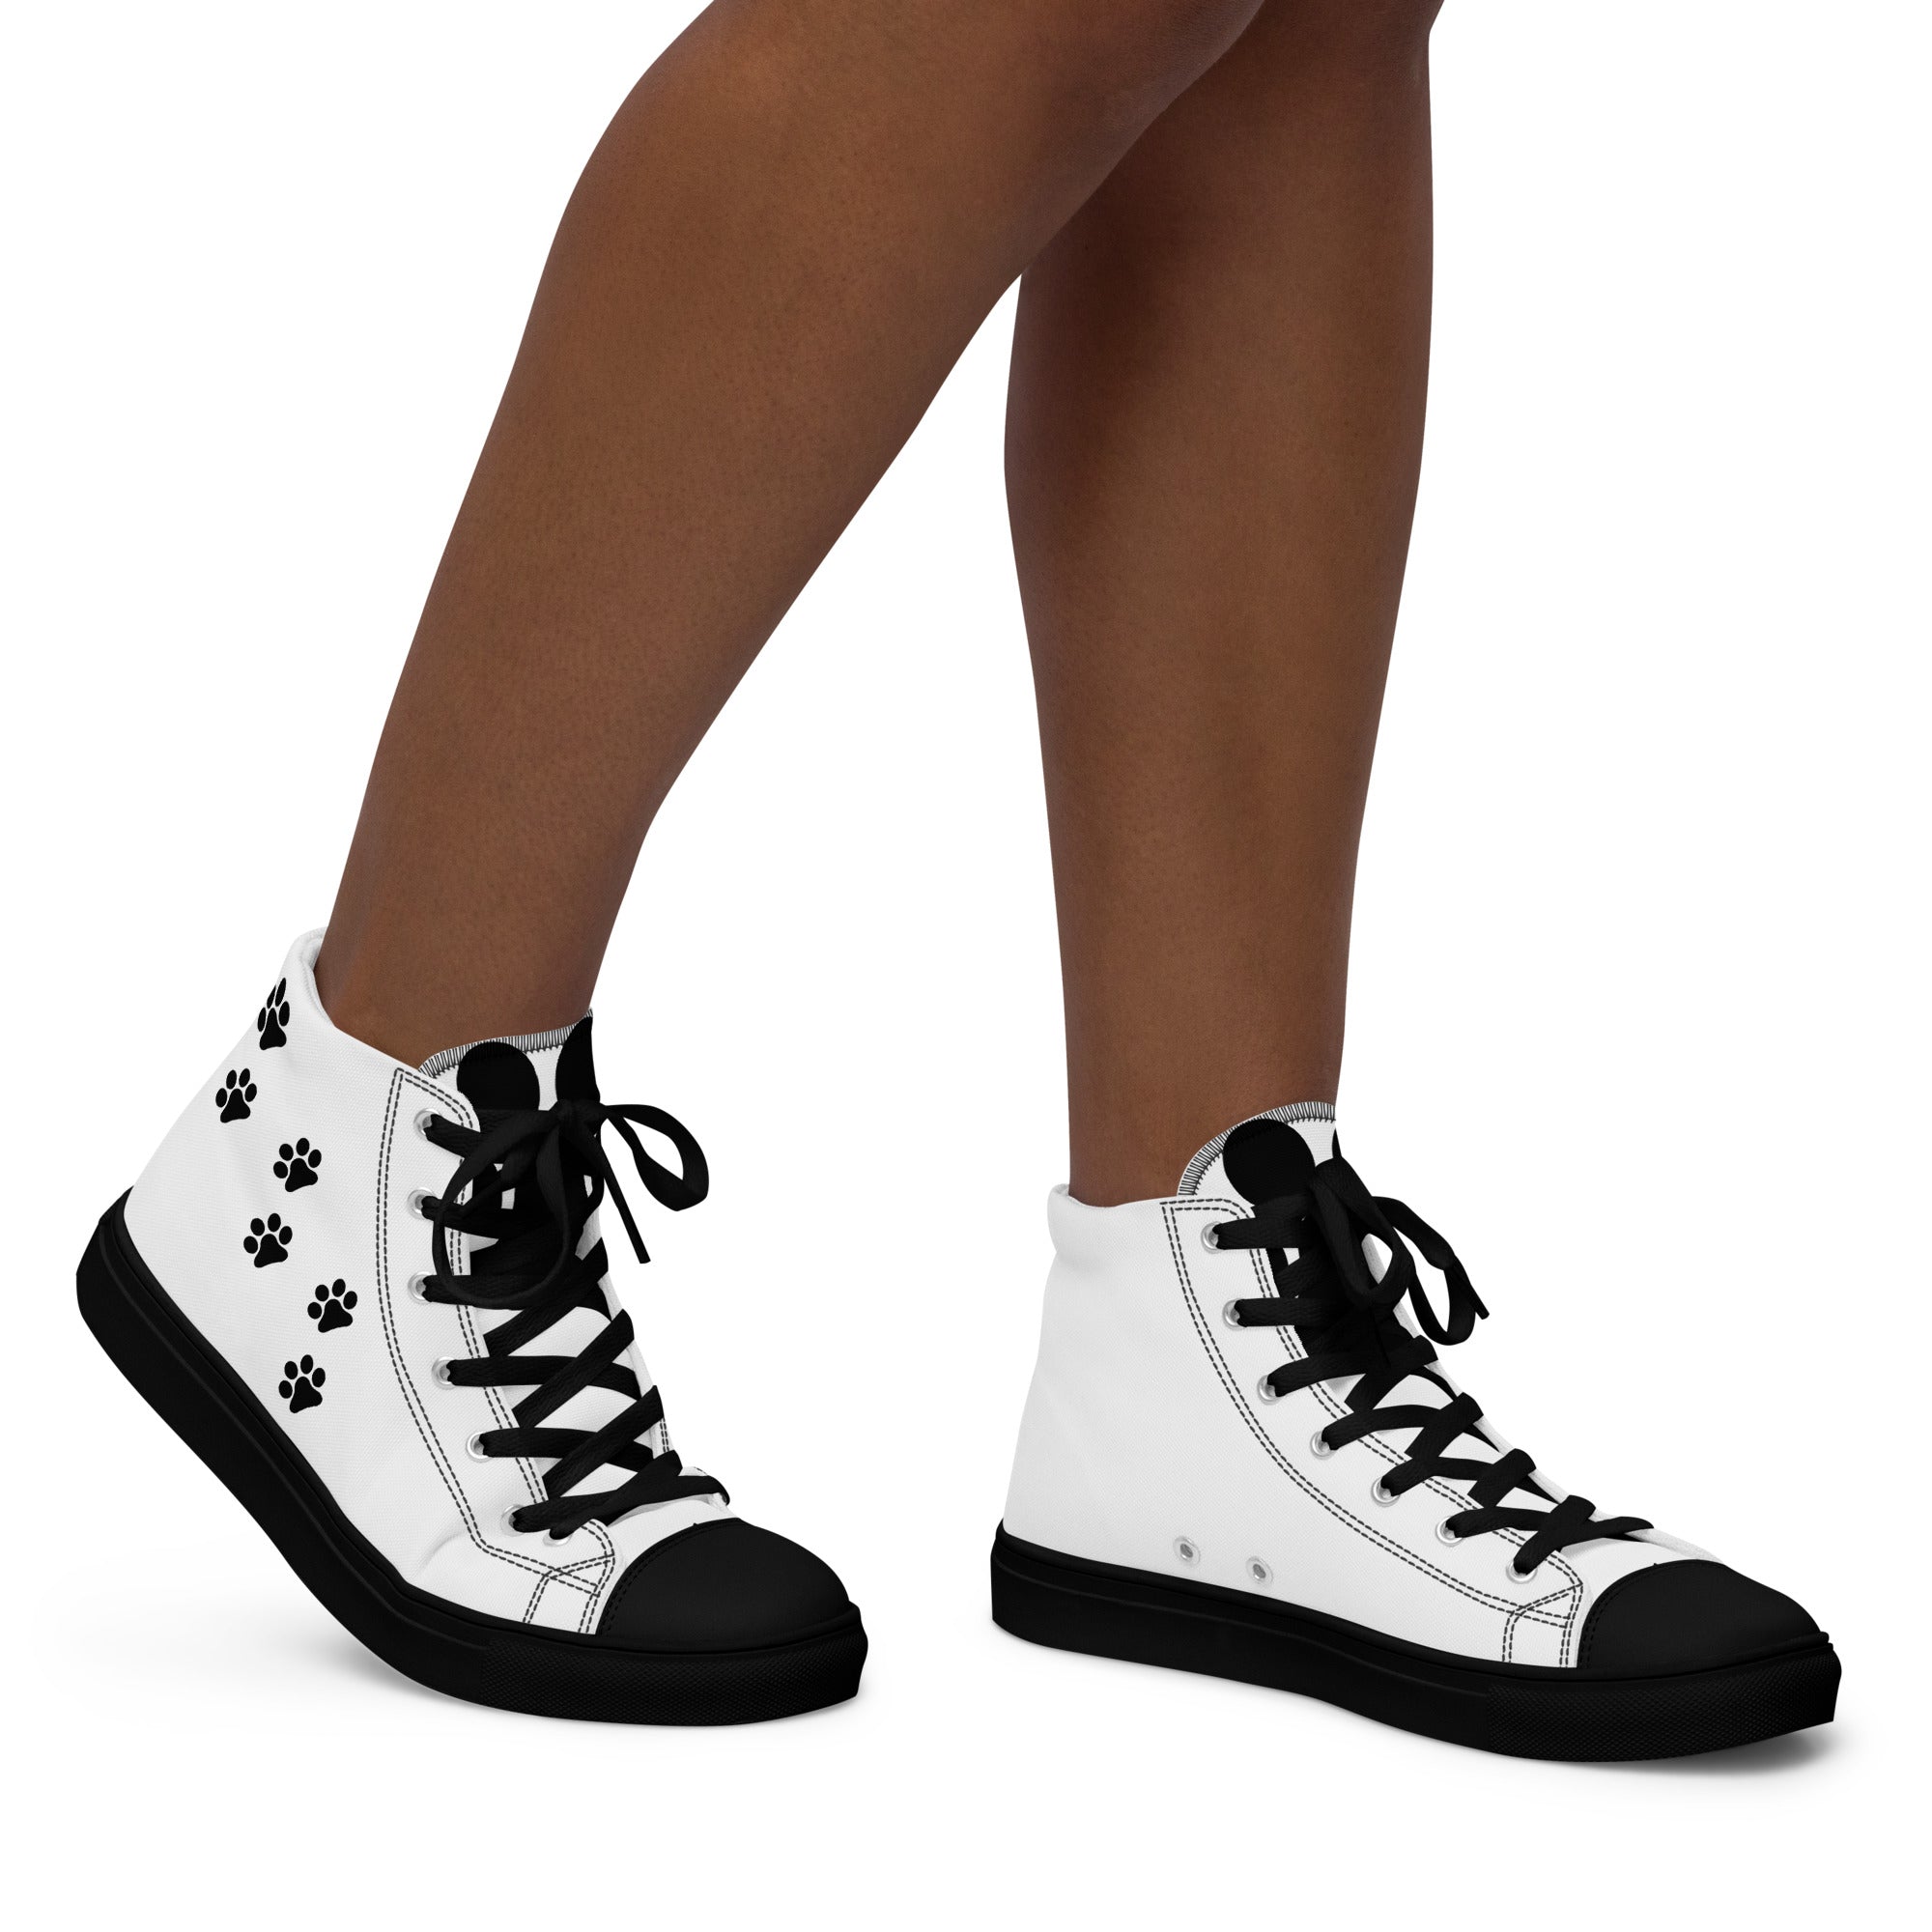 Women’s Paw Print High Top Canvas Shoes